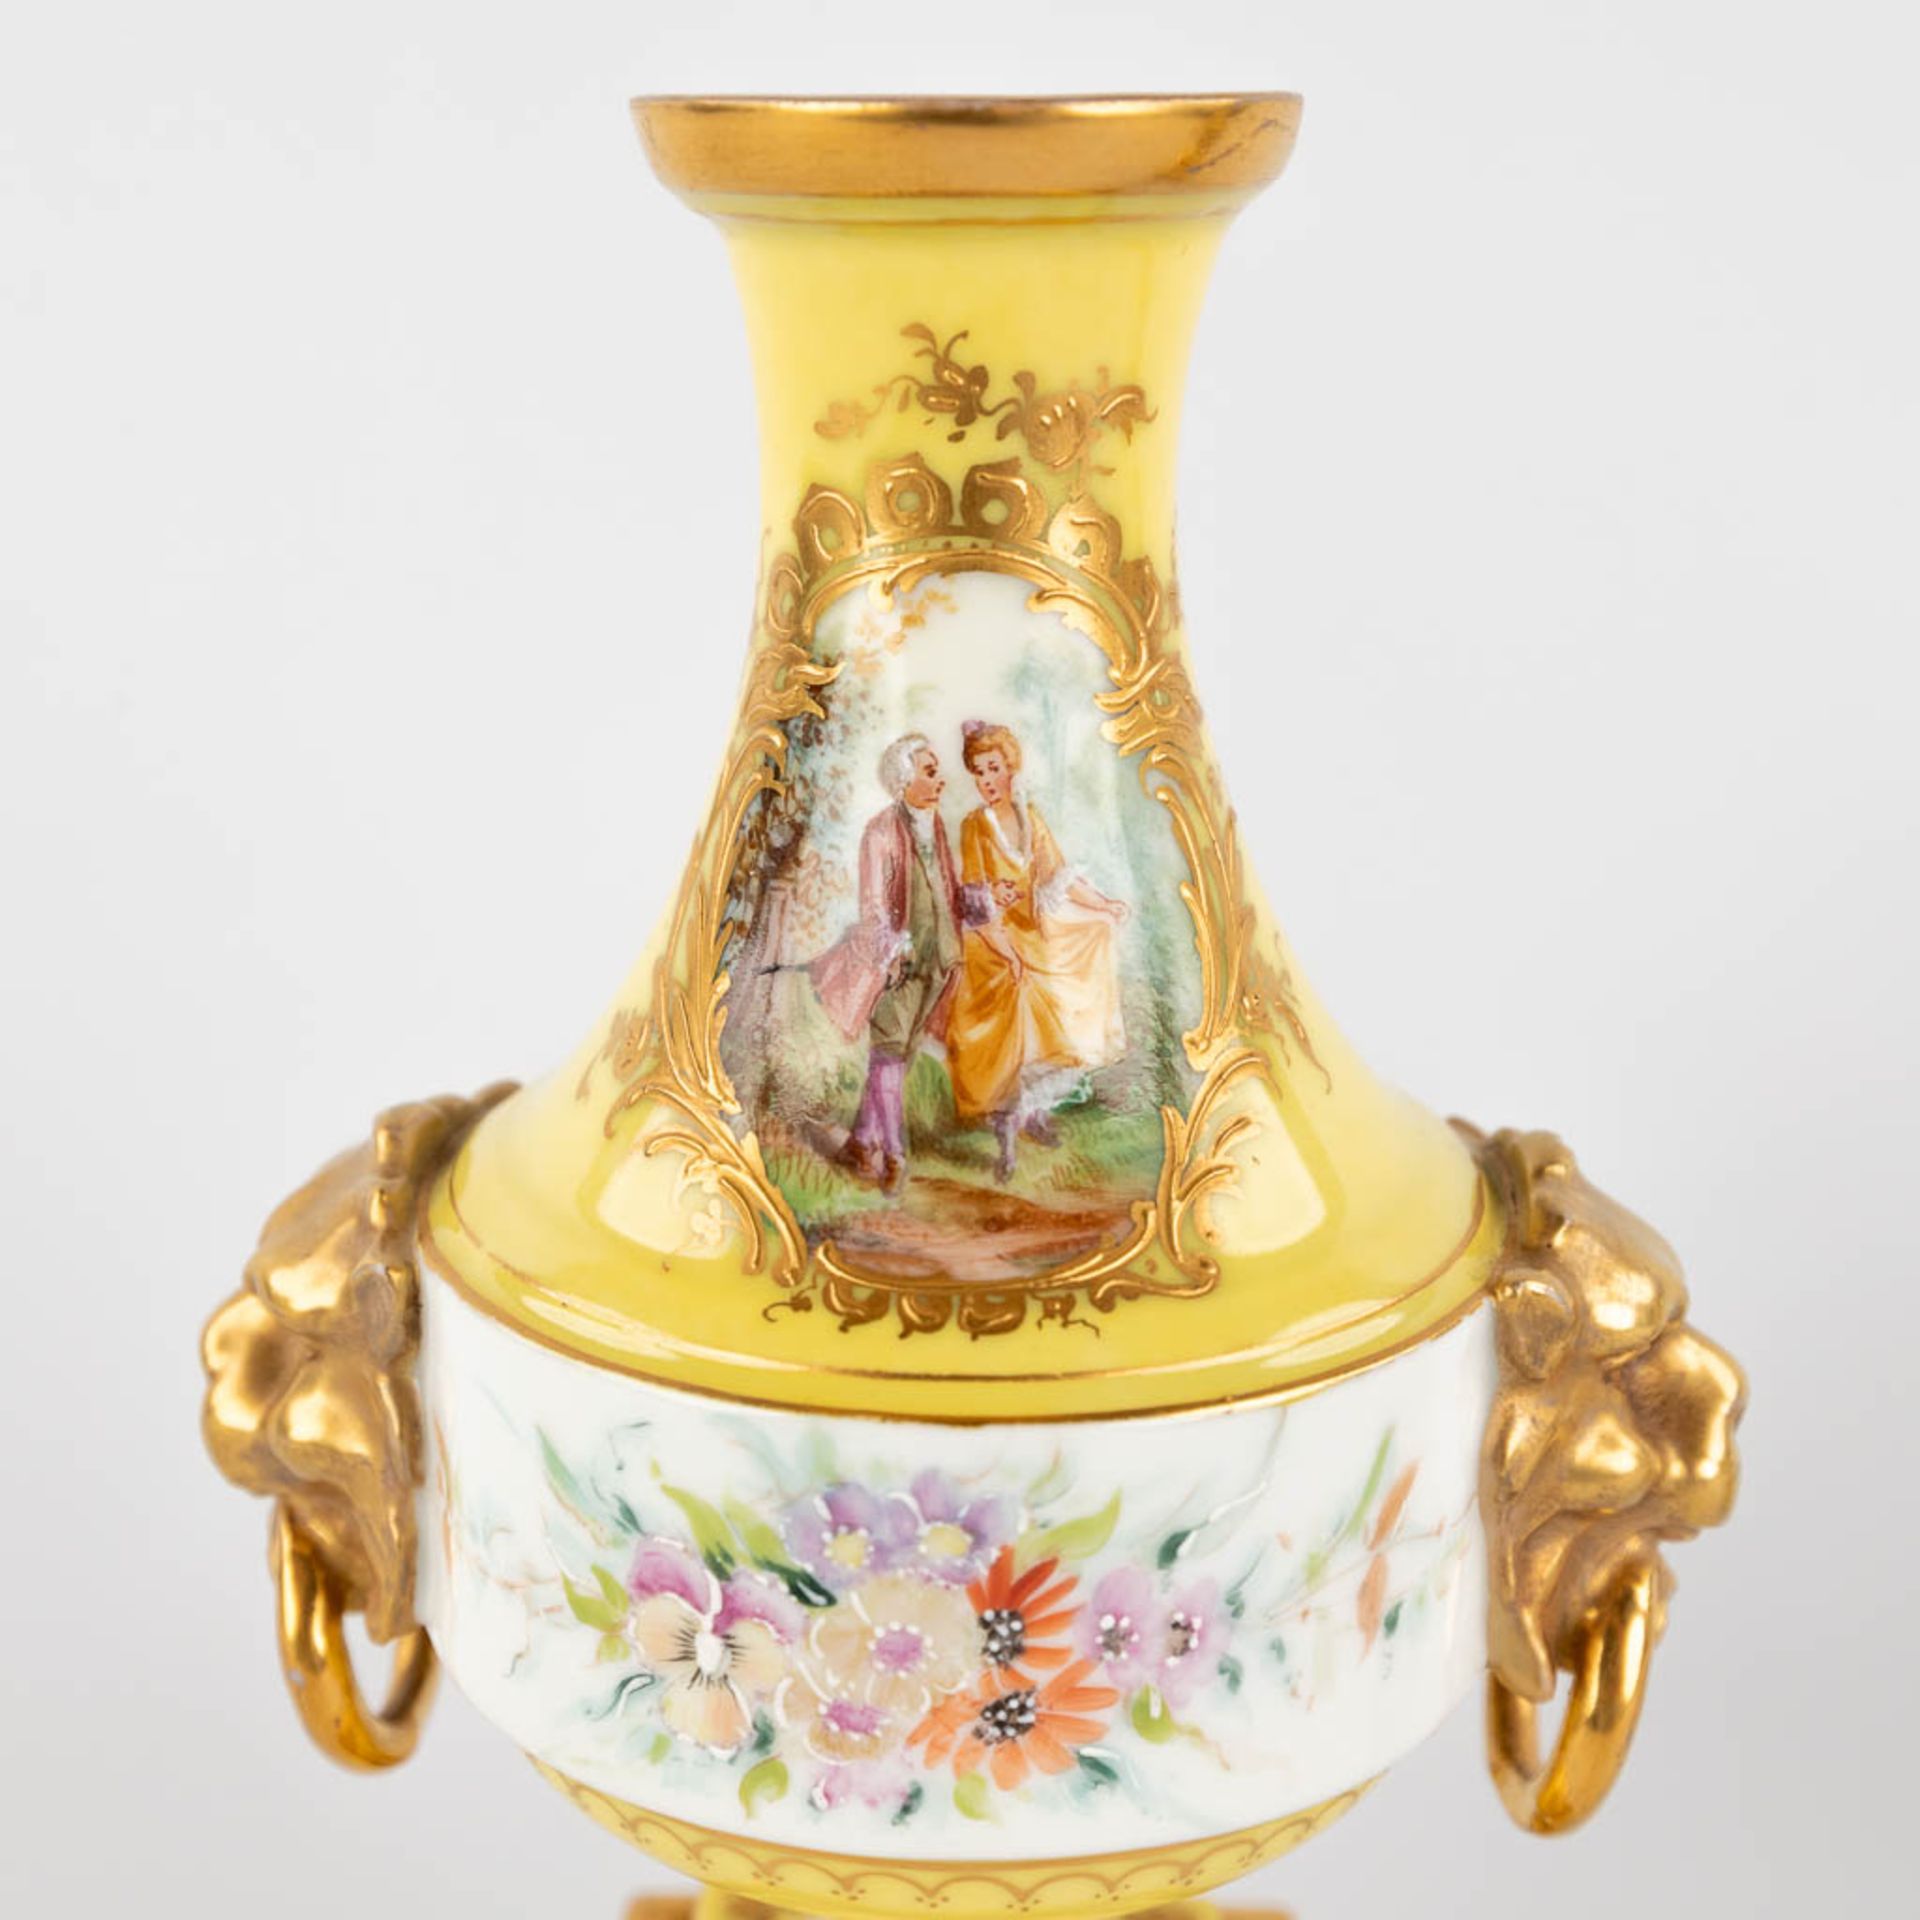 A pair of antique, hand-painted porcelain vases, yellow glaze and flower with lion's heads decor. (L - Image 12 of 16